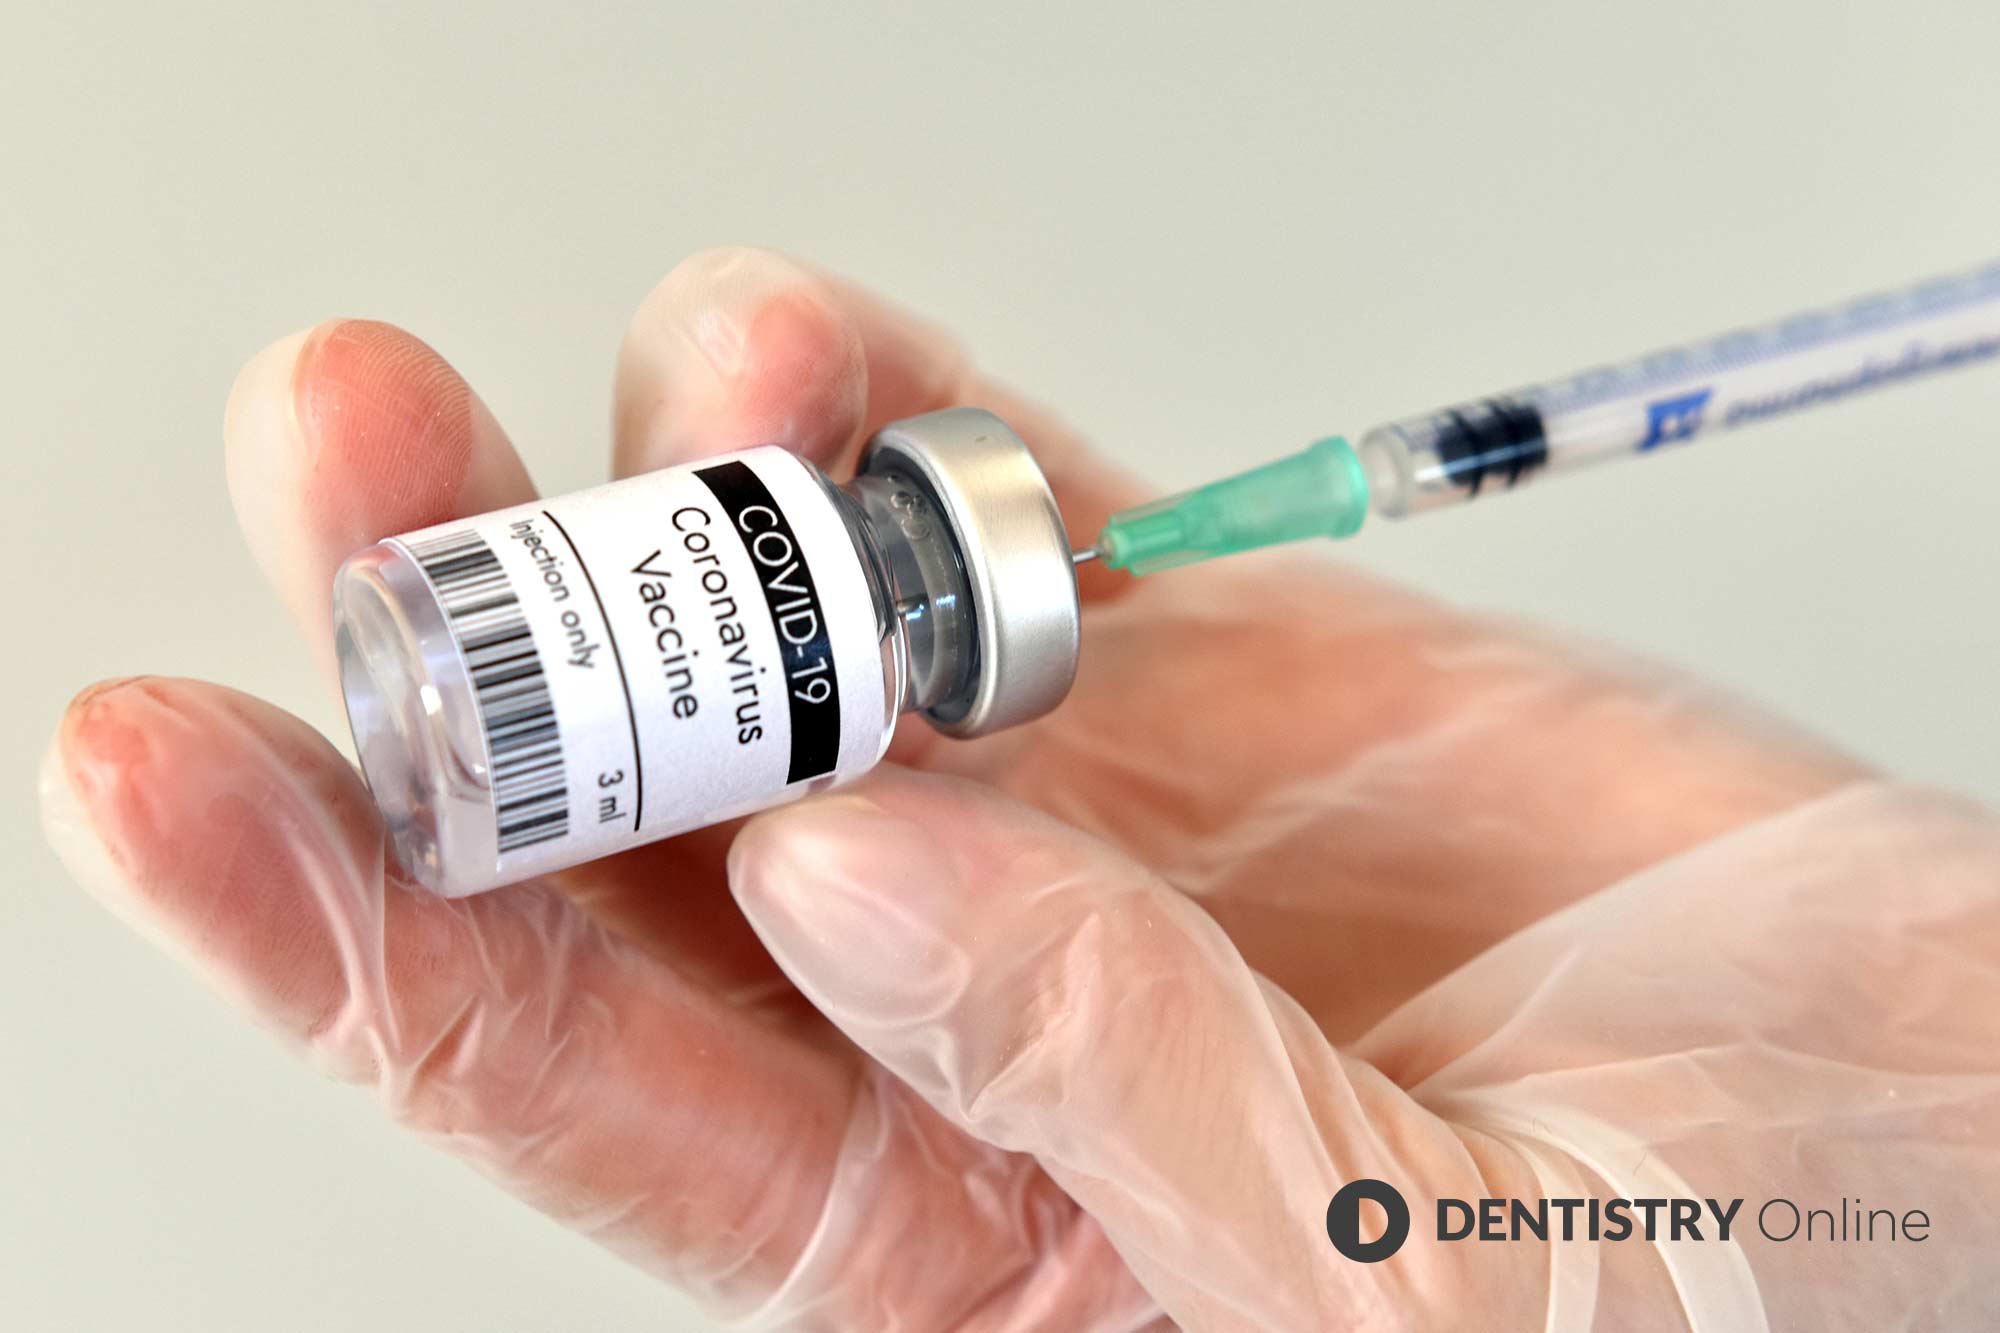 Dental professionals are being called upon to sign up as part of the national effort to administer the vaccine against COVID-19